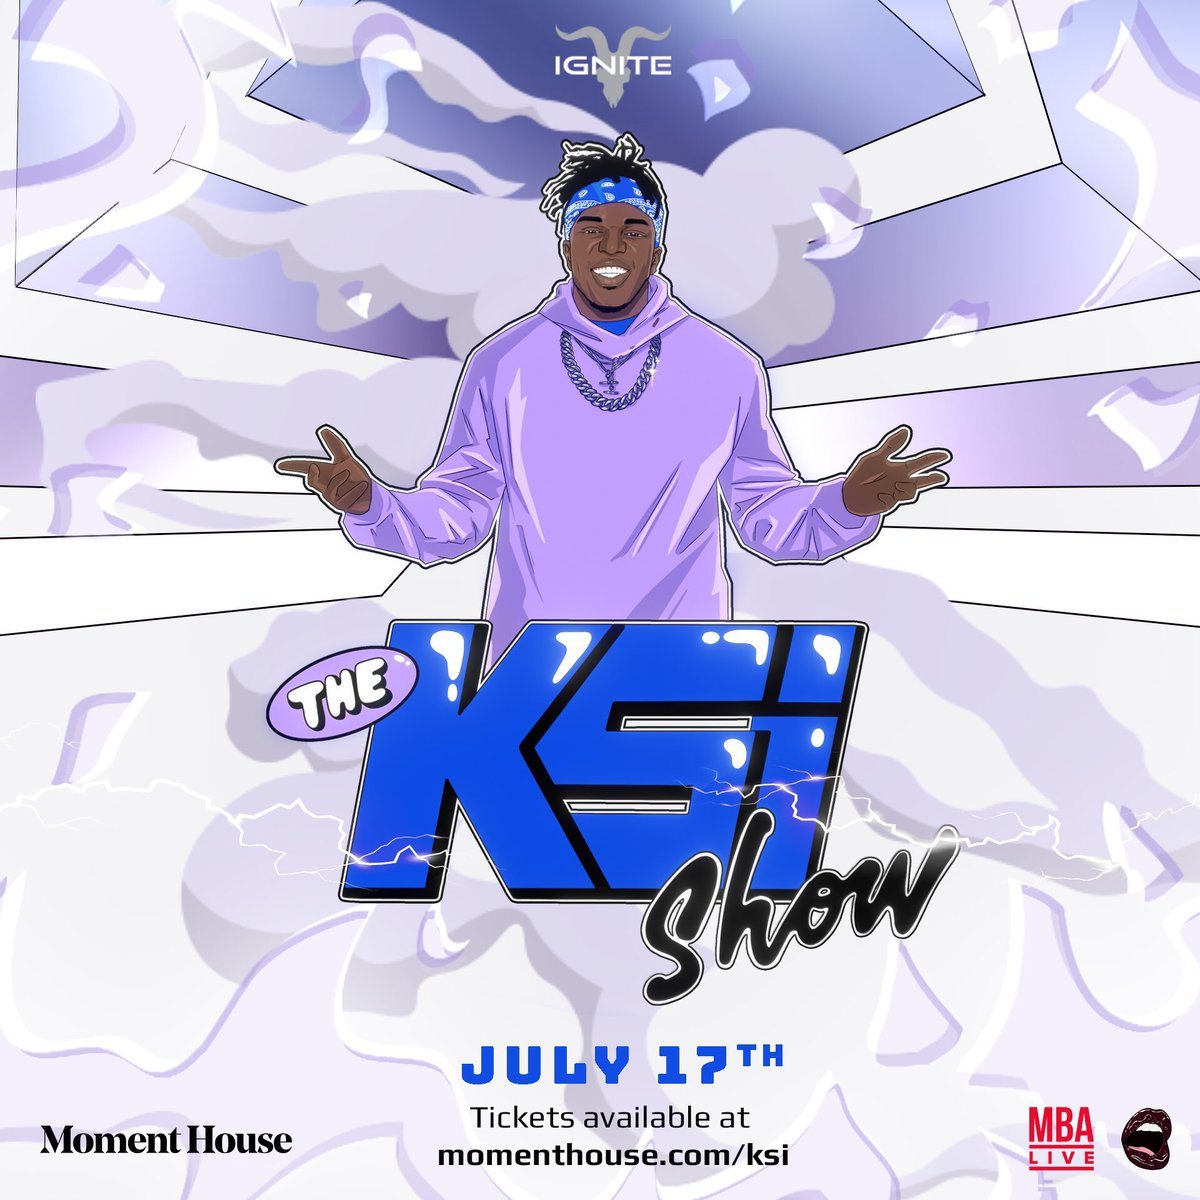 We’re giving away 2 KSI show tickets!! Just follow us and rt this tweet to enter! Winners will be announced July 15th💛